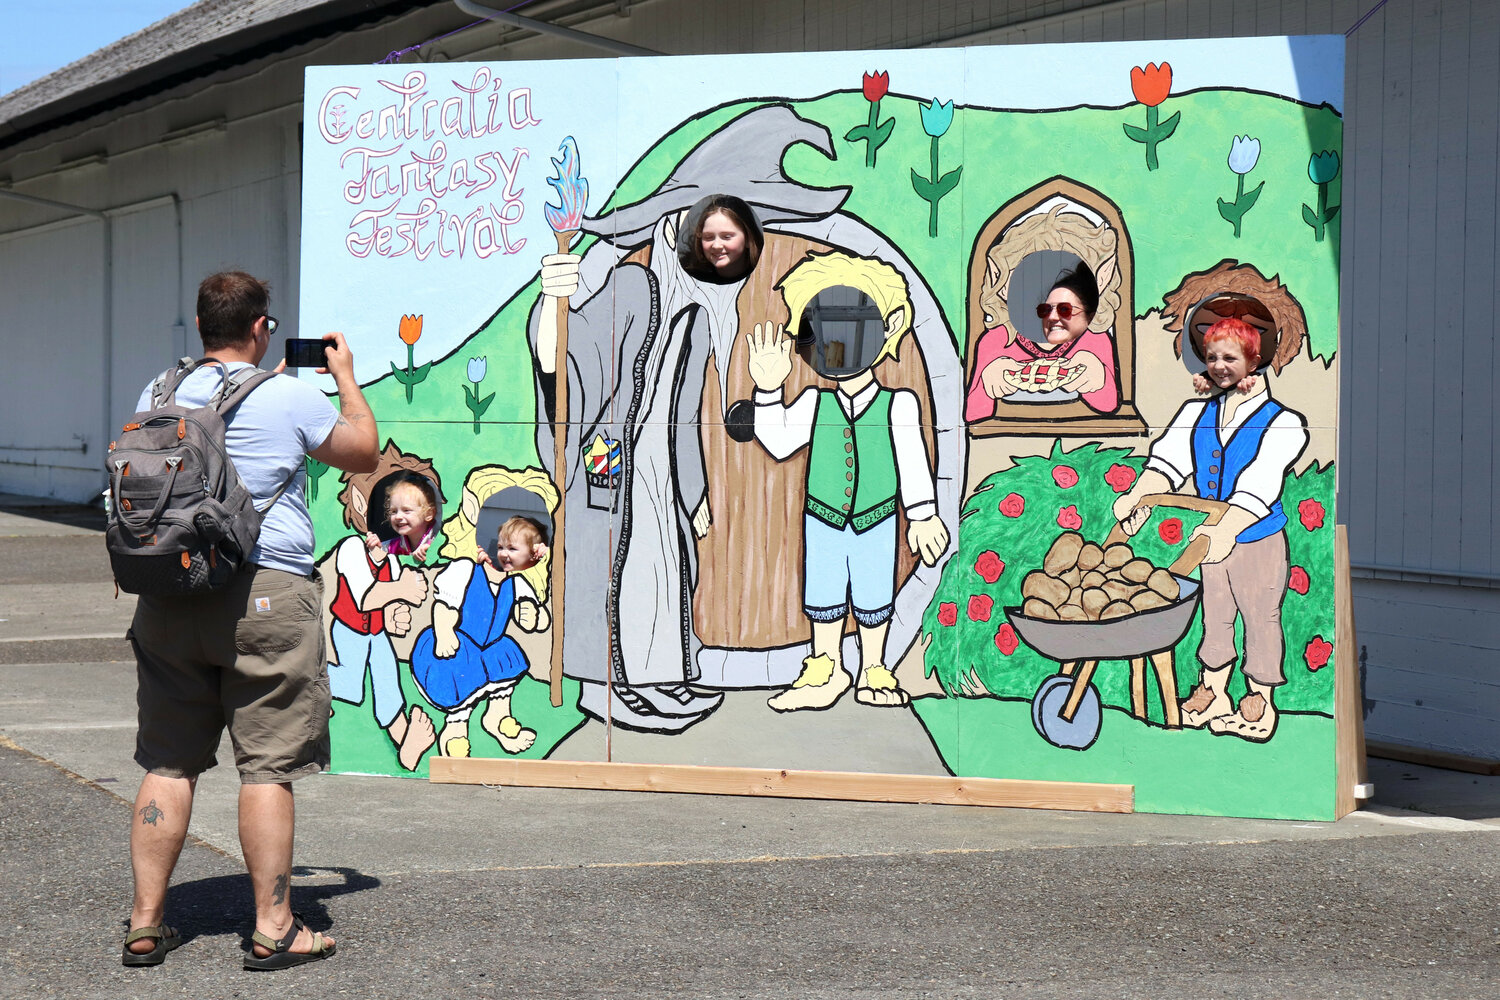 Attendees of the Centralia Fantasy Festival pose for a photo in a photo booth cutout for the festival at the Southwest Washington Fairgrounds on Saturday, May 27.